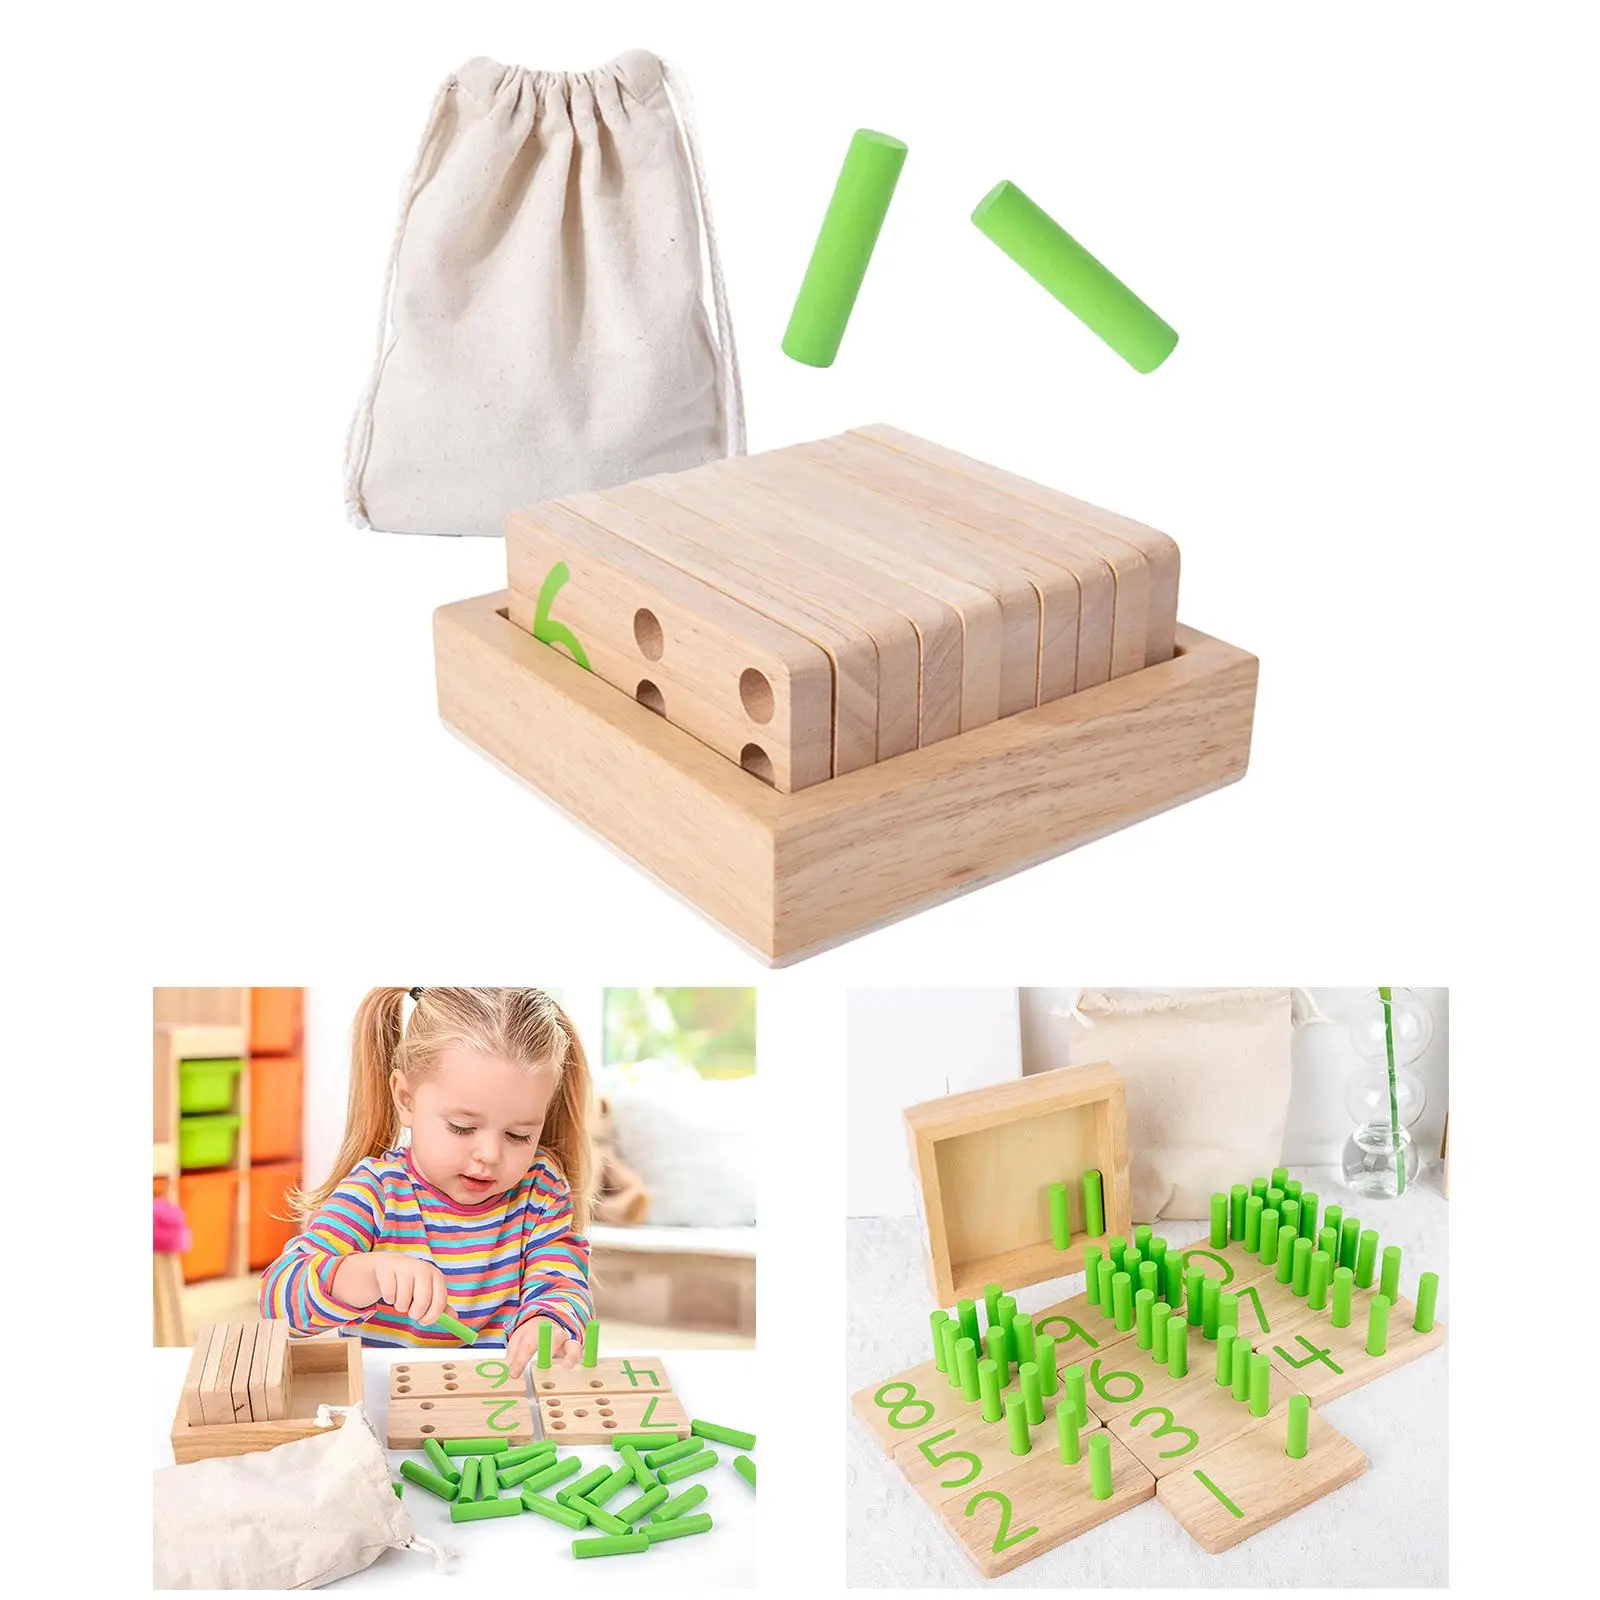 Wooden Sticks Inserting Blocks Enlightenment Toys Educational Toy Counting Rods Box Counting Stick for Children Birthday Gifts